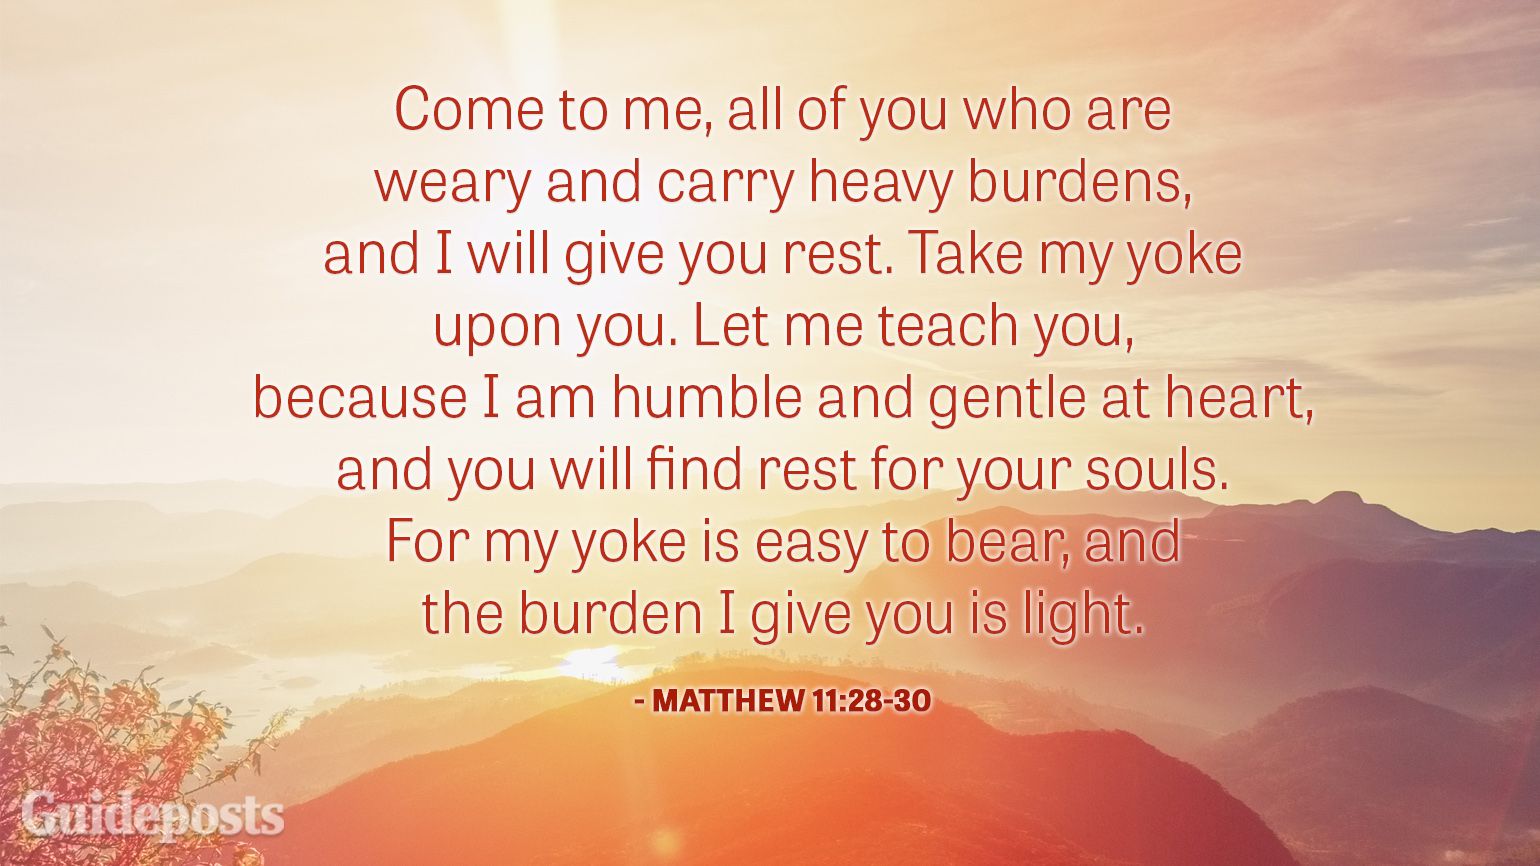 Come to me, all of you who are weary and carry heavy burdens, and I will give you rest. Take my yoke upon you. Let me teach you, because I am humble and gentle at heart, and you will find rest for your souls. For my yoke is easy to bear, and the burden I give you is light.